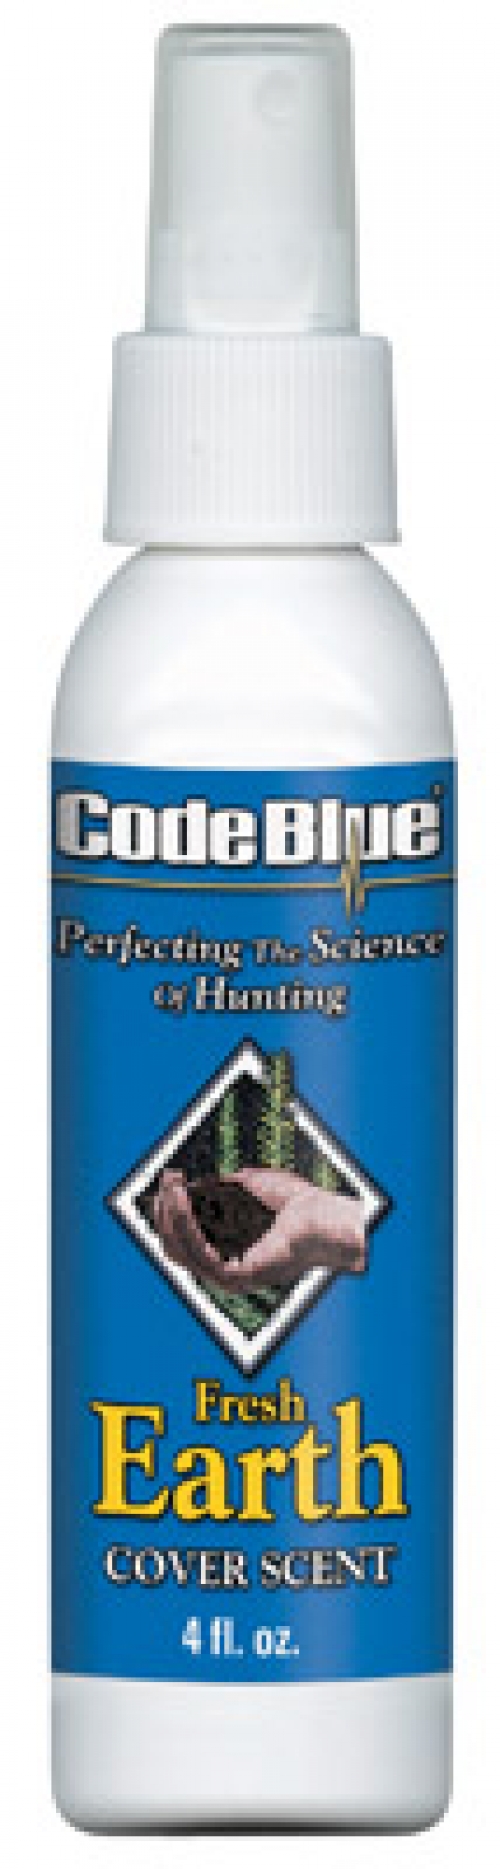 Code Blue Earth Cover Scent Human Odor Eliminating 4 oz